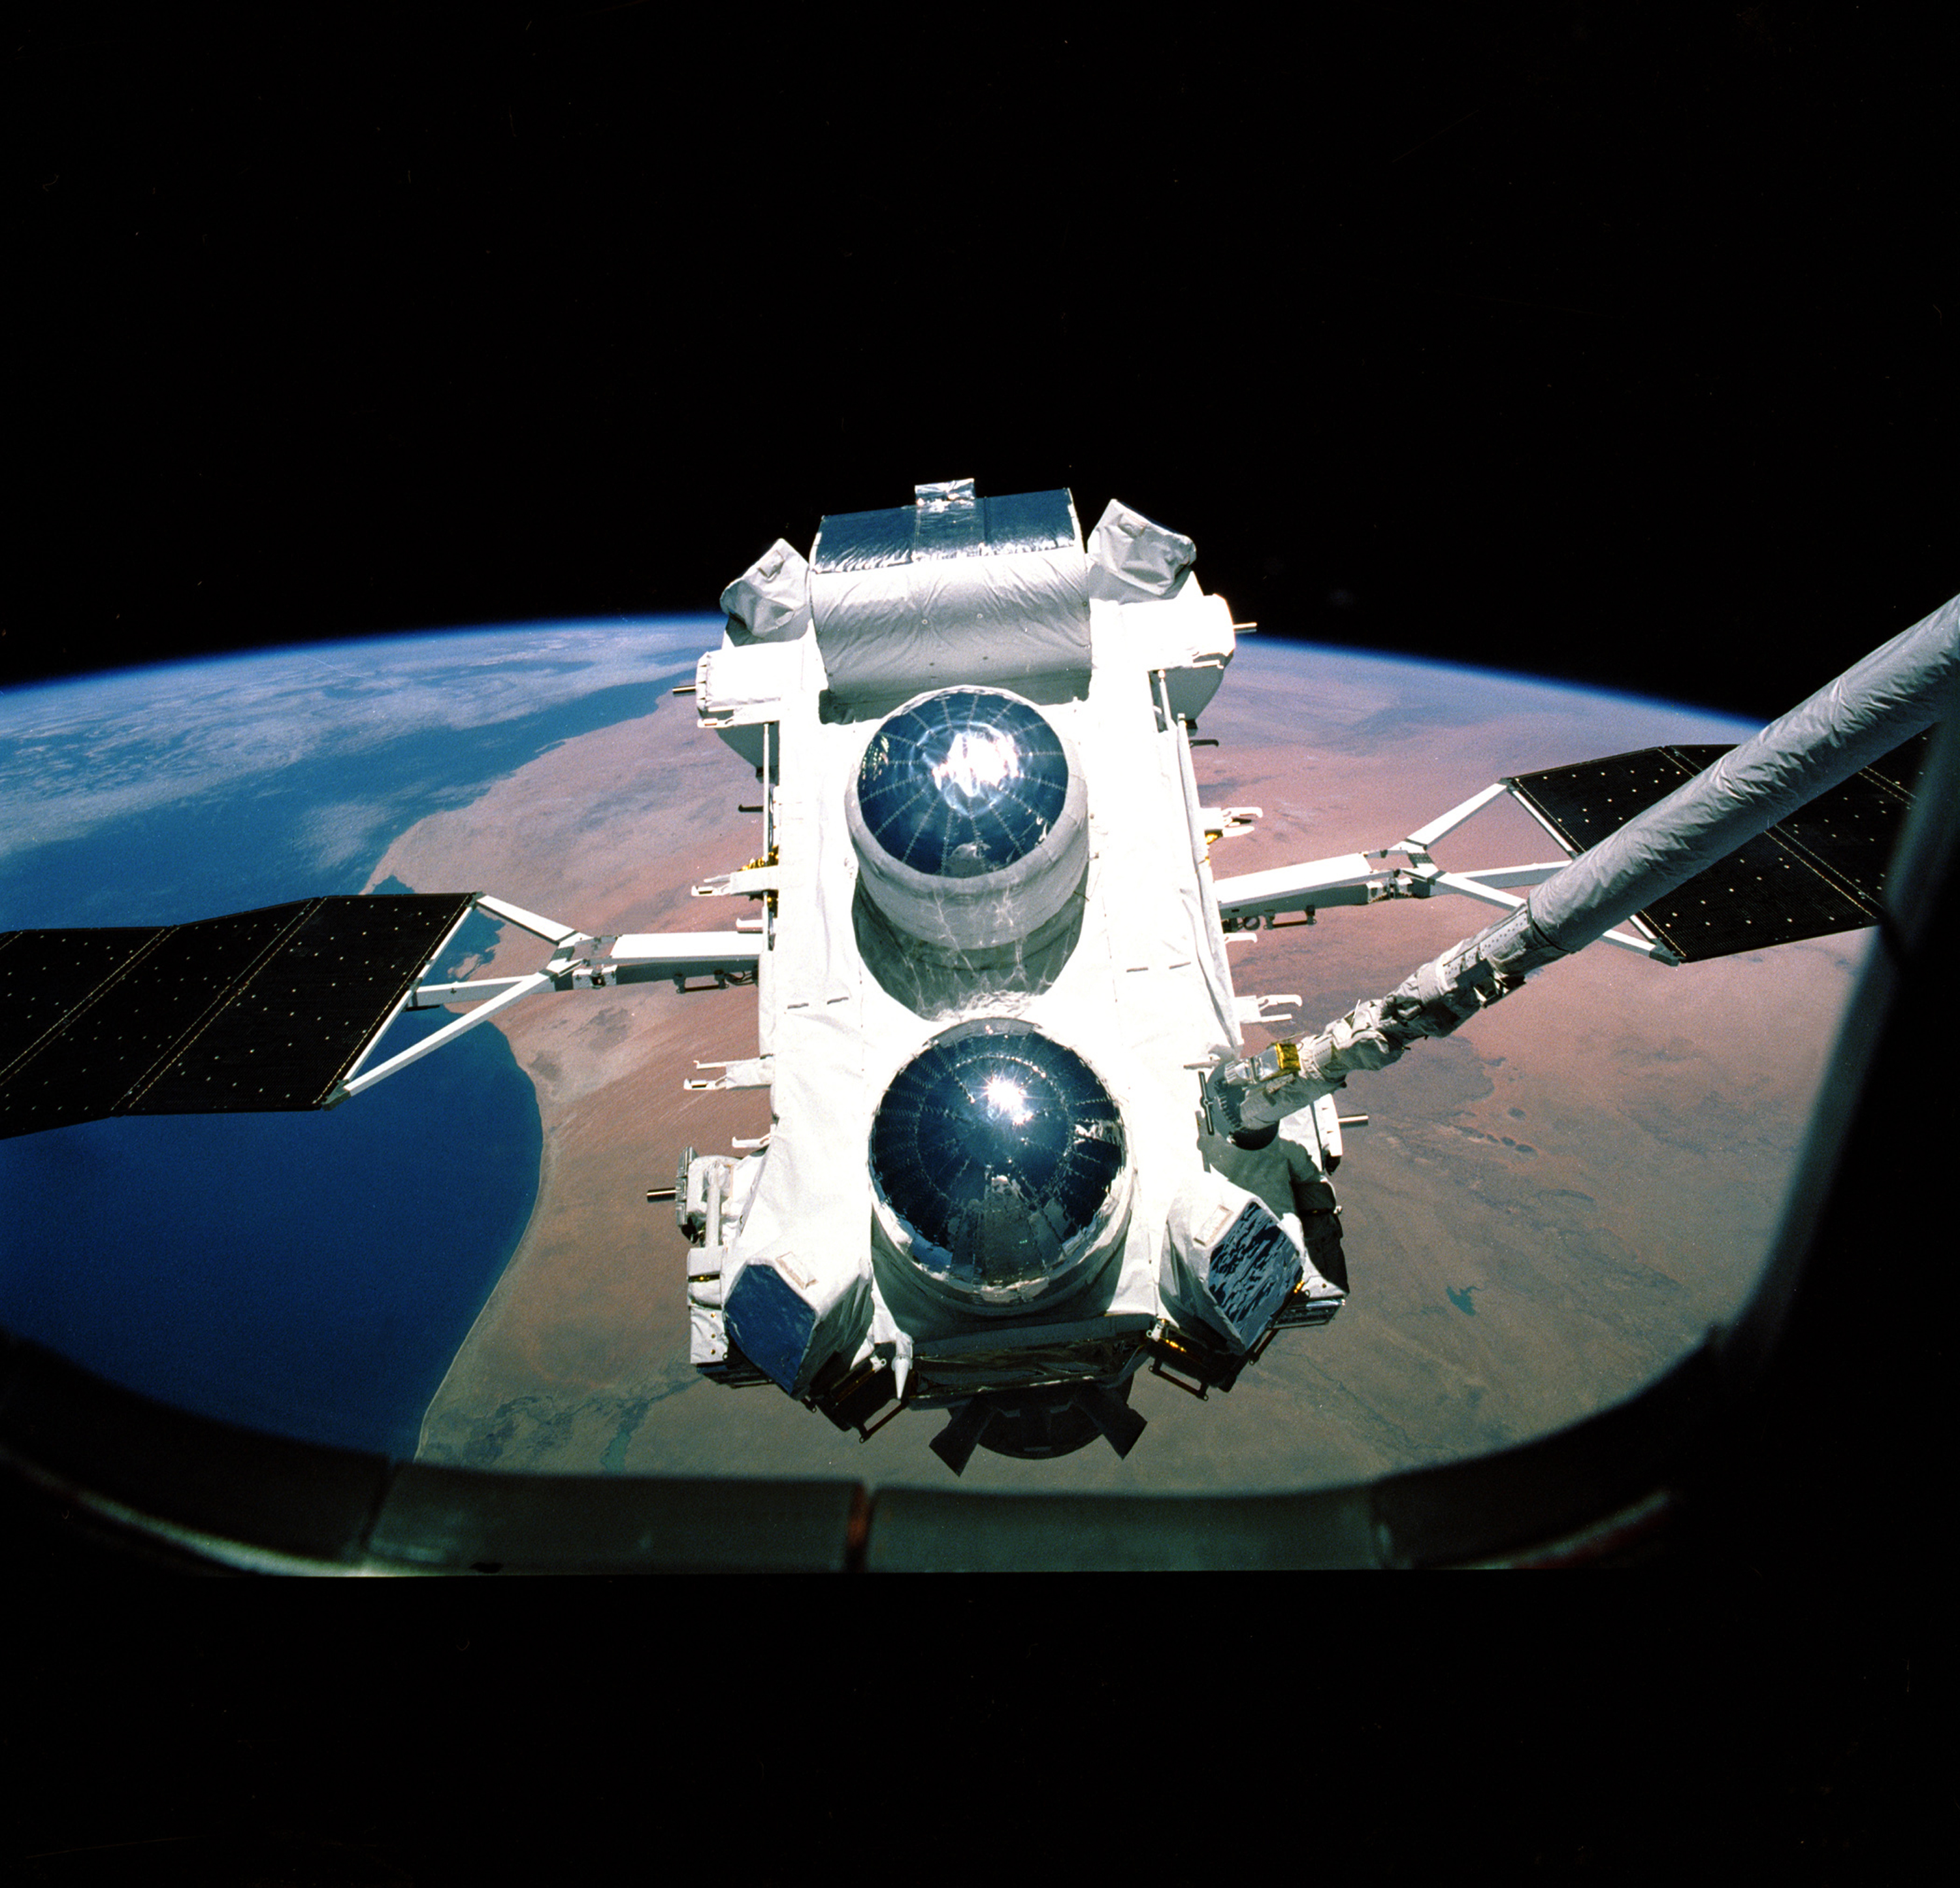 Deployment of CGRO by STS 37